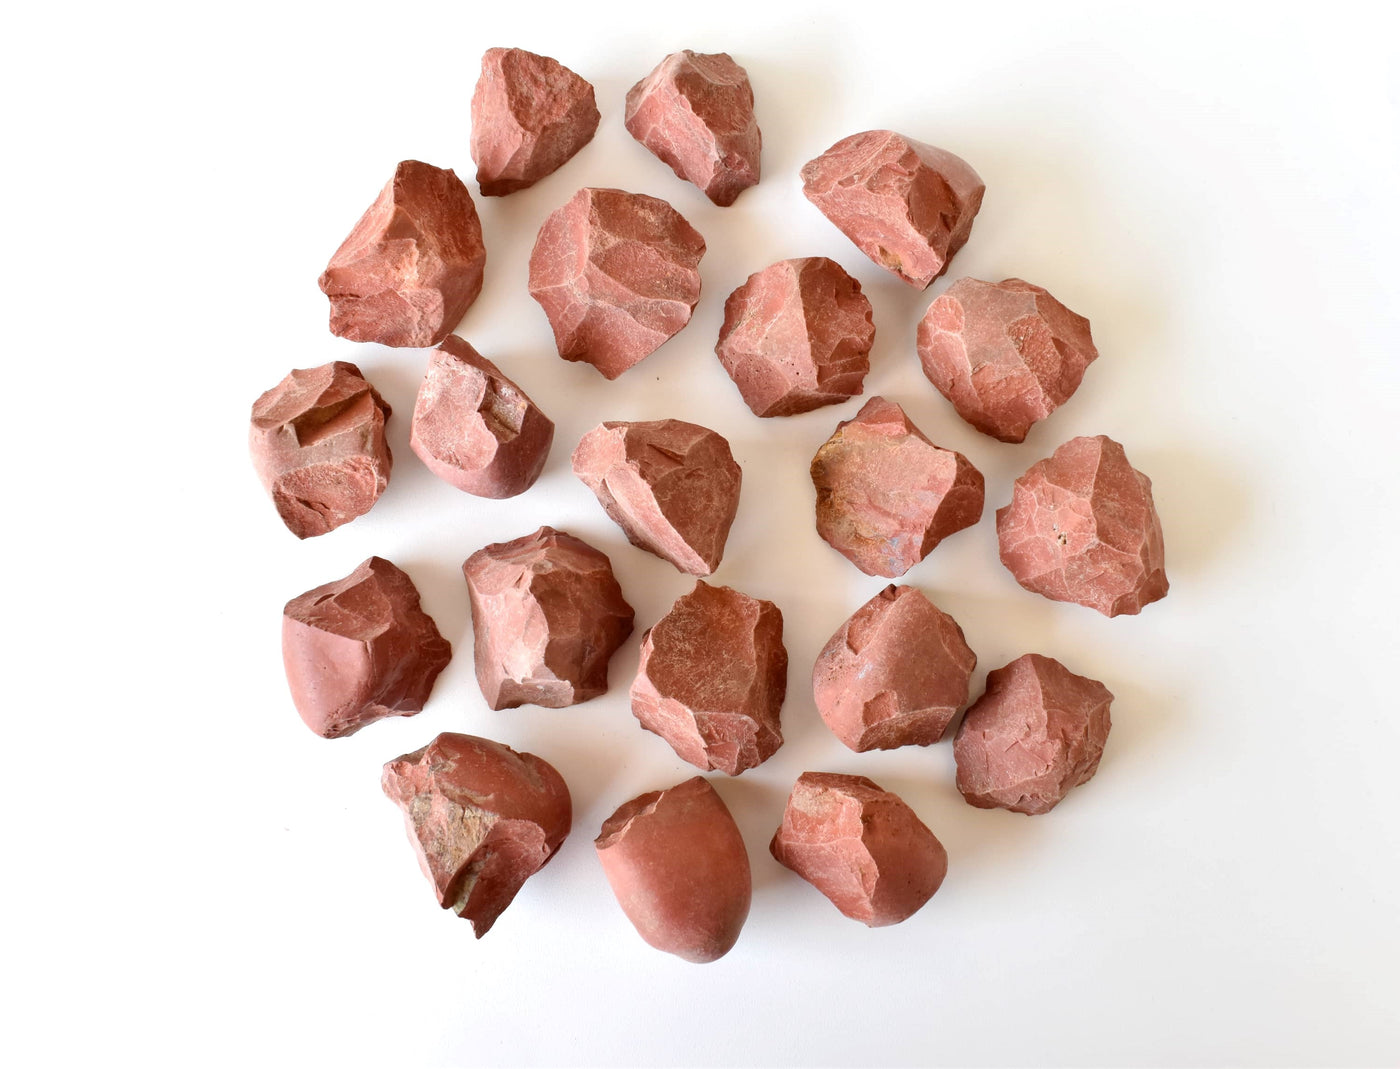 Red Jasper Rough Rocks (Strength and Protection)